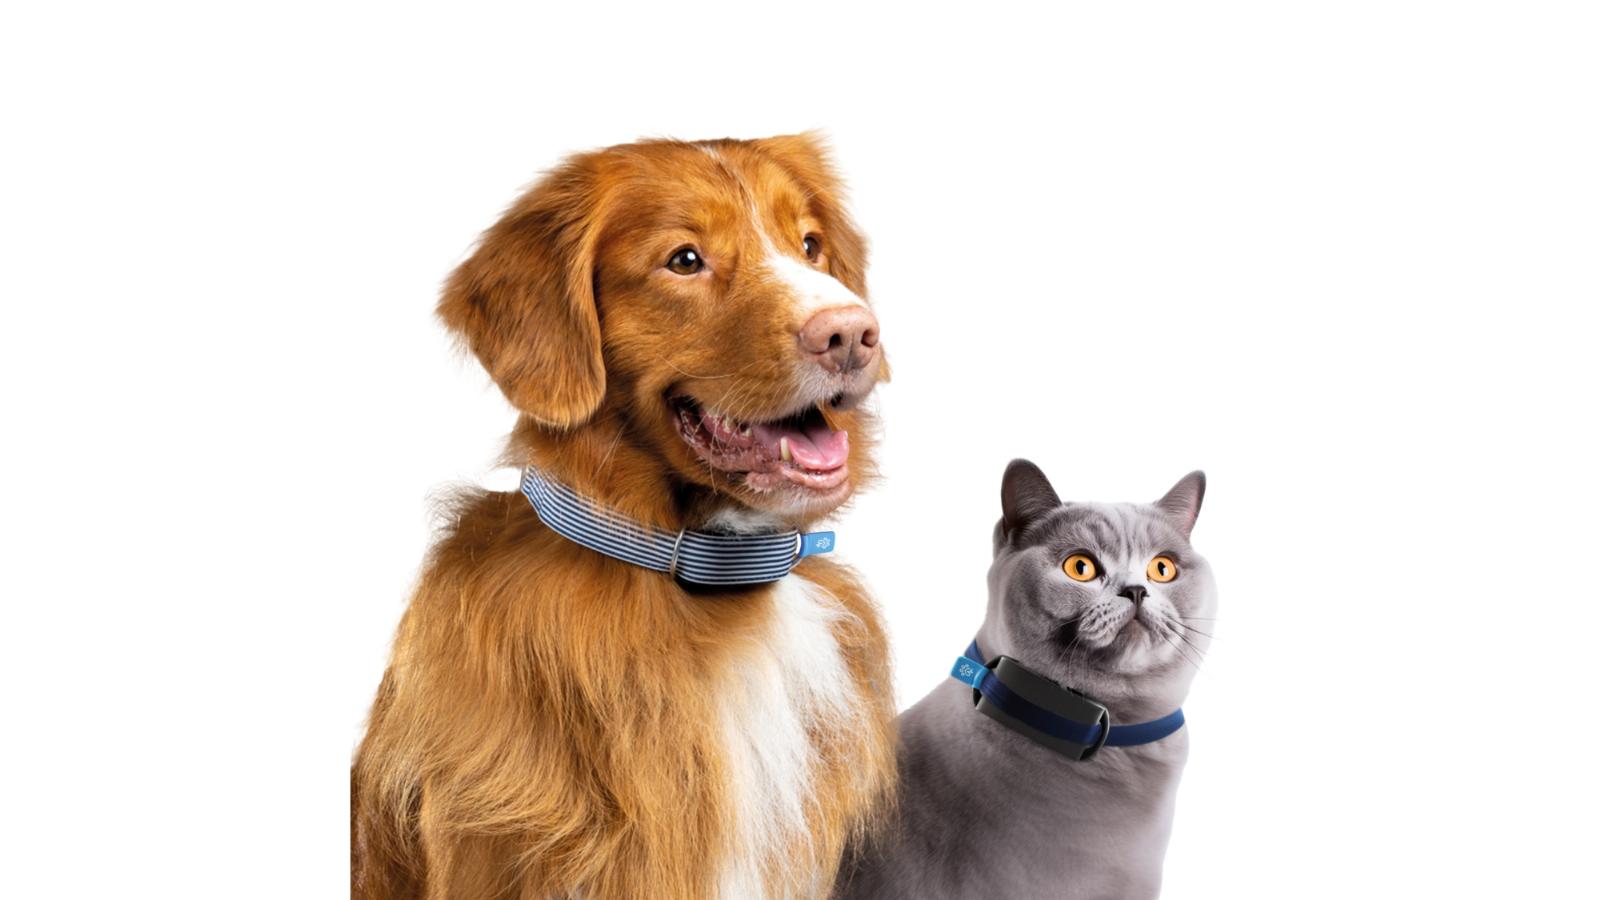 Invoxia has a new smart collar suitable for both cats and dogs